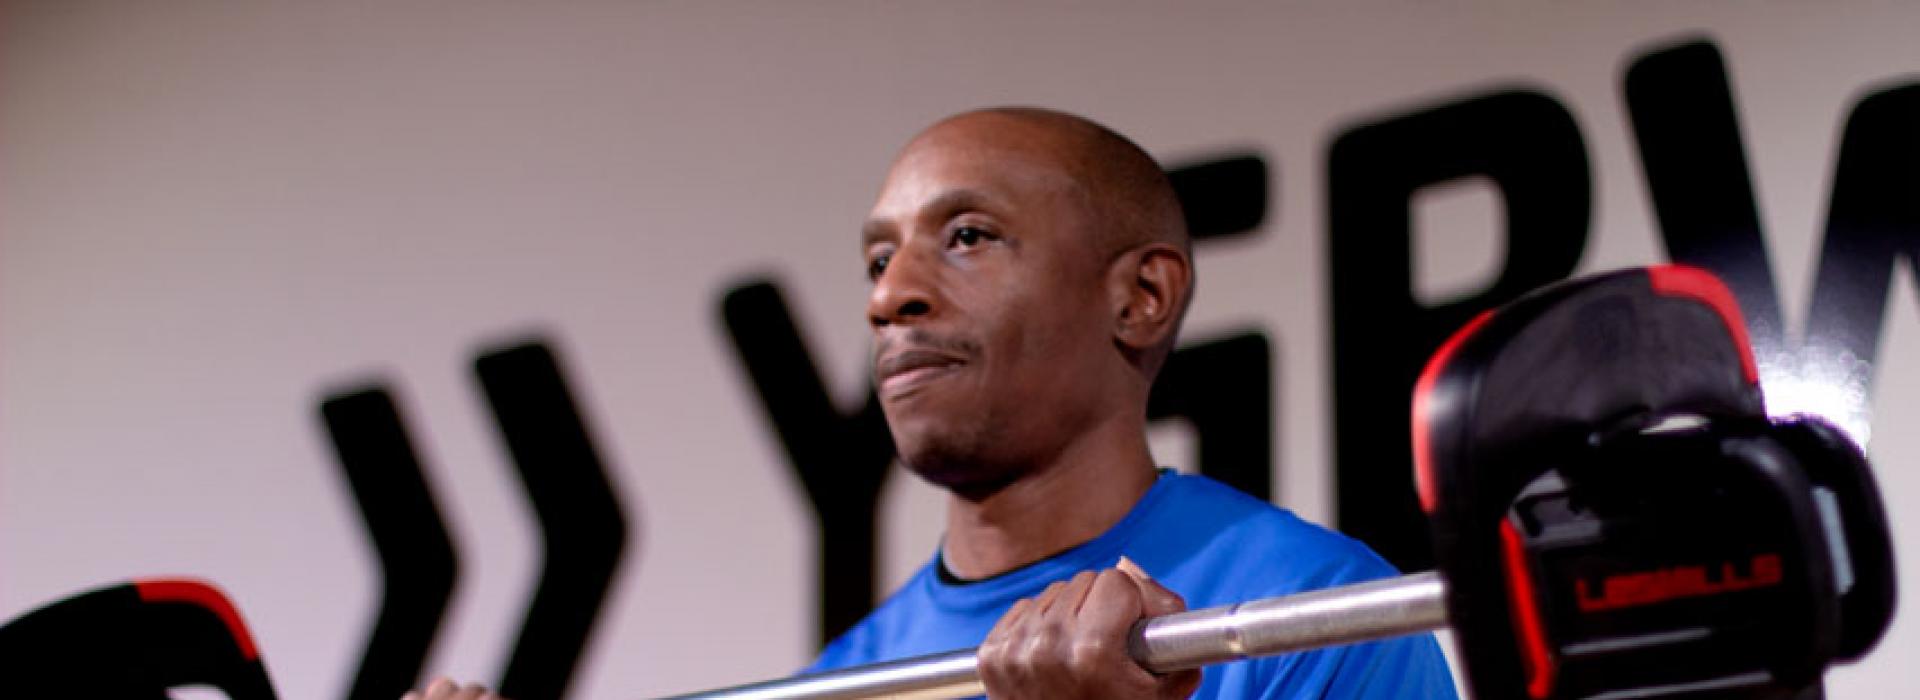 Personal trainer Kareem Lanier demonstrates proper form when lifting weights at the Kennett Area YMCA